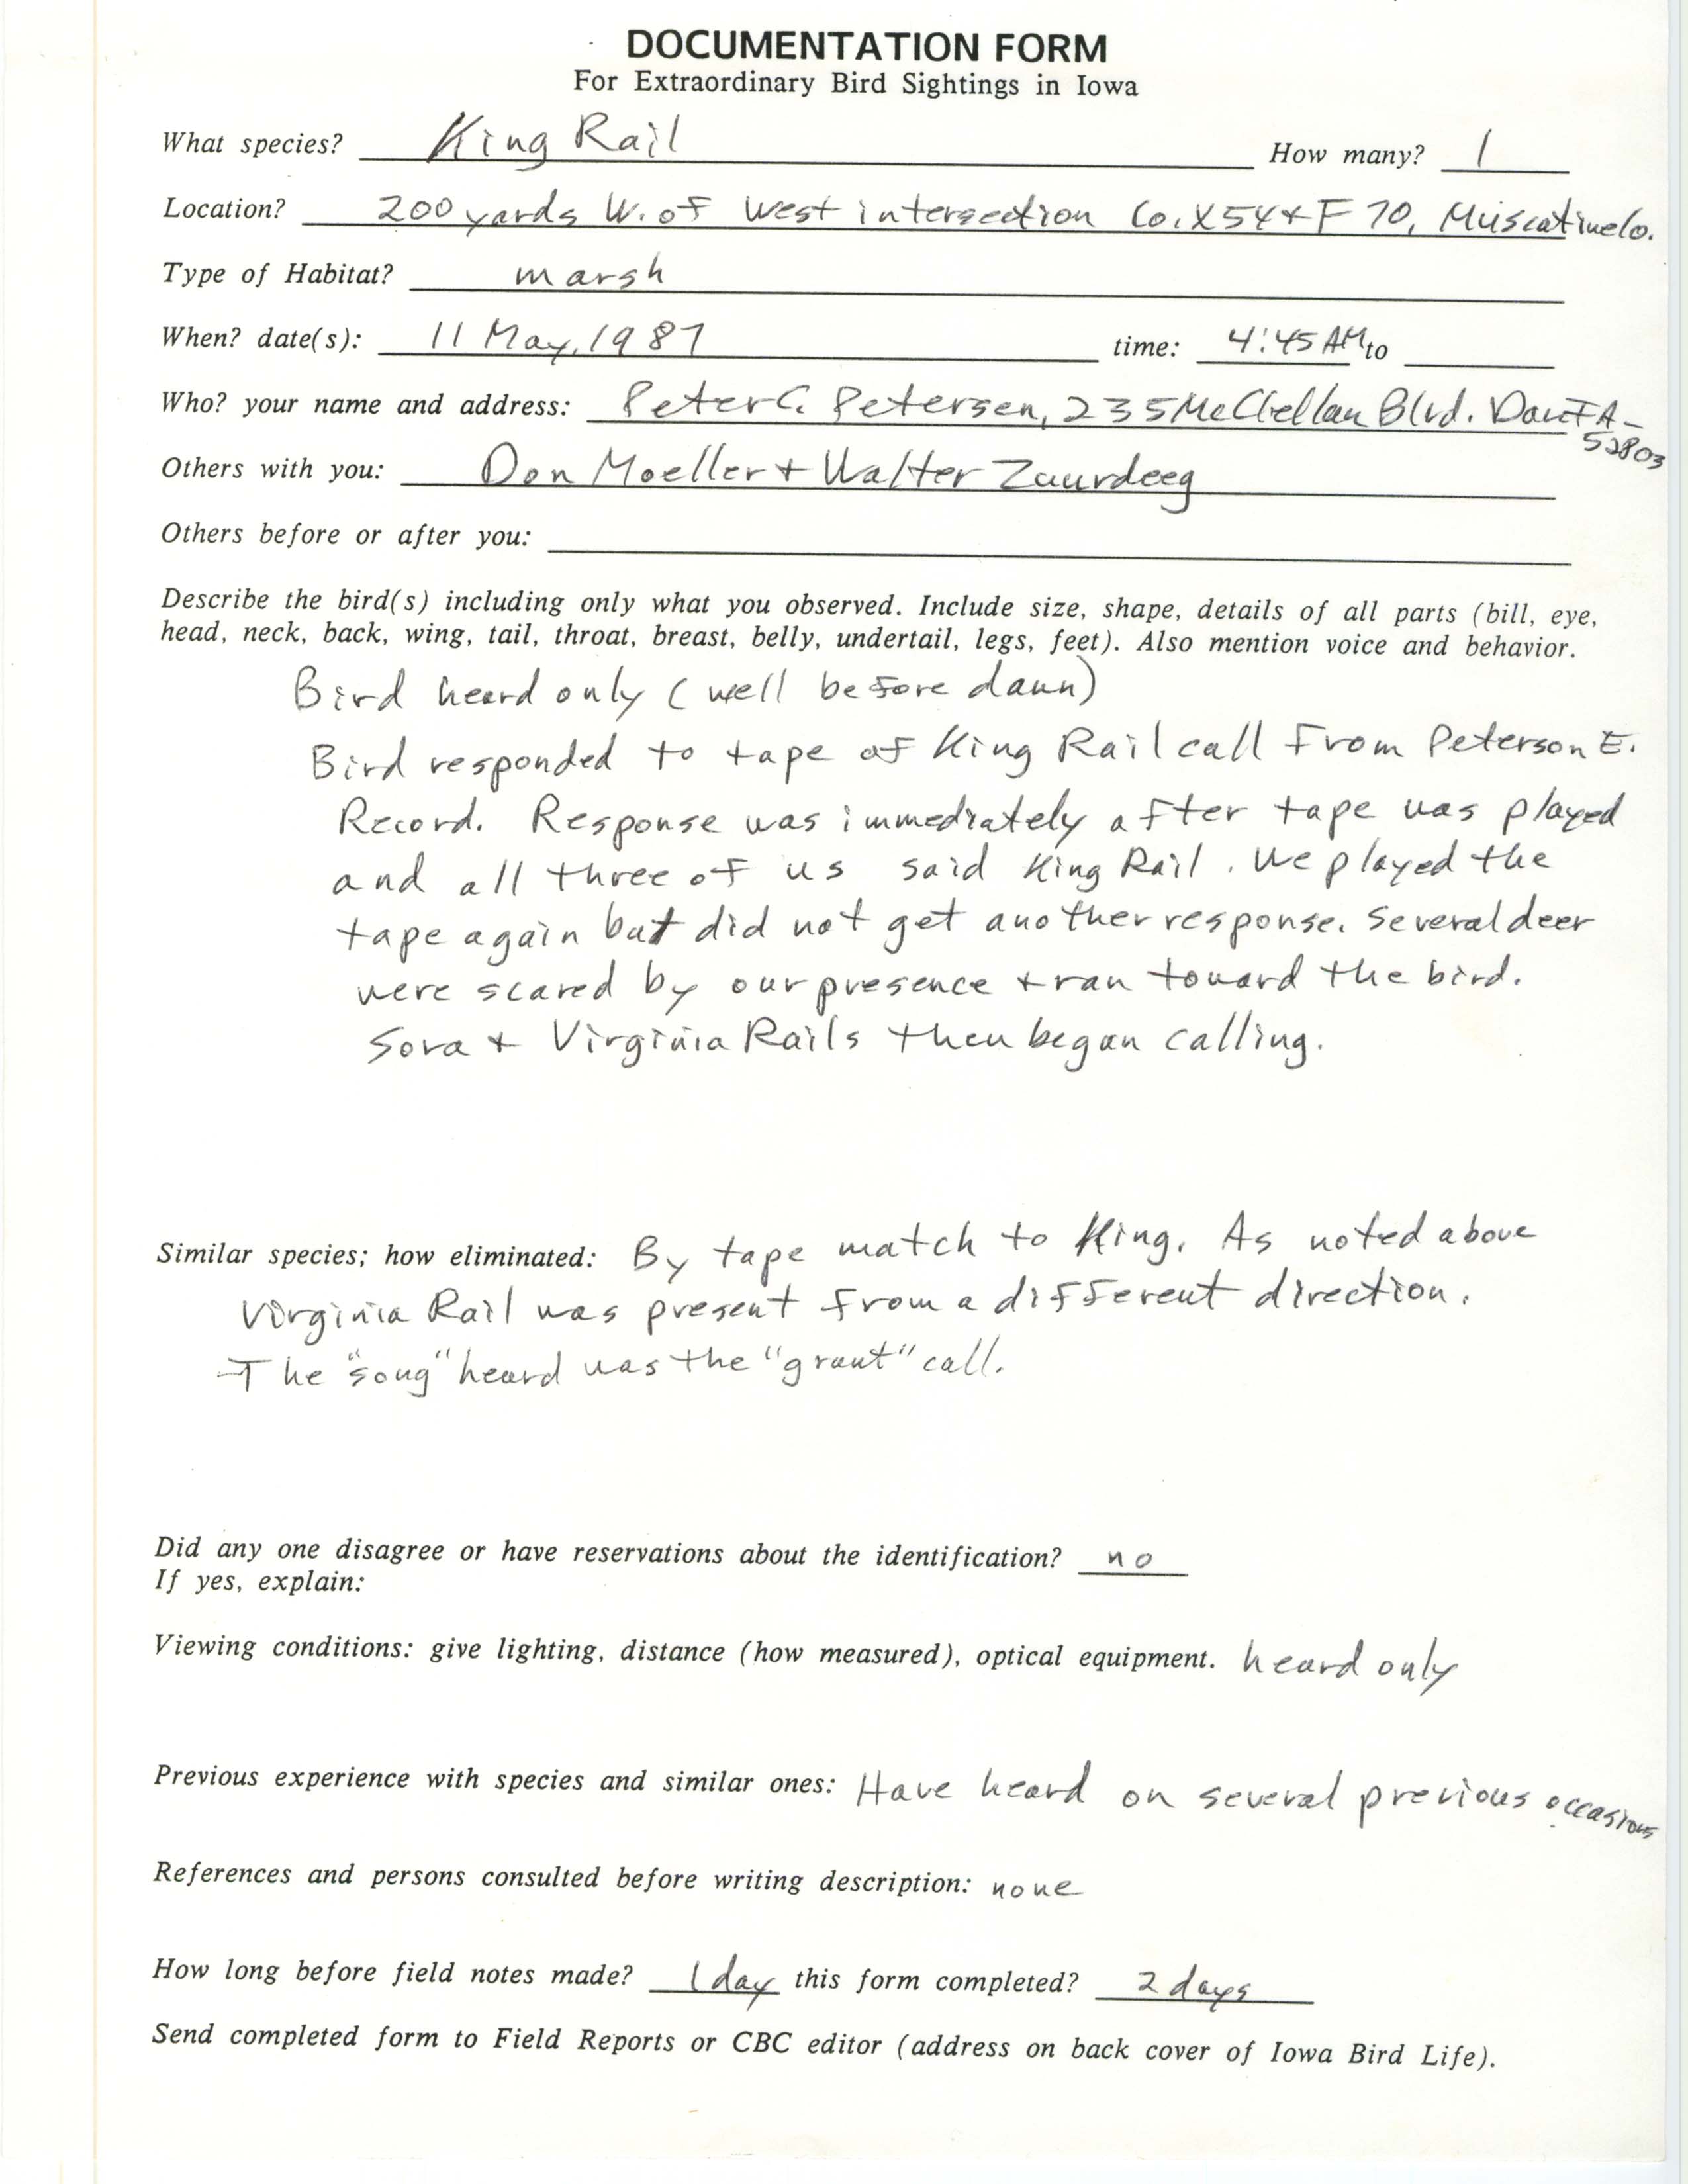 Rare bird documentation form for King Rail at Muscatine County, 1987